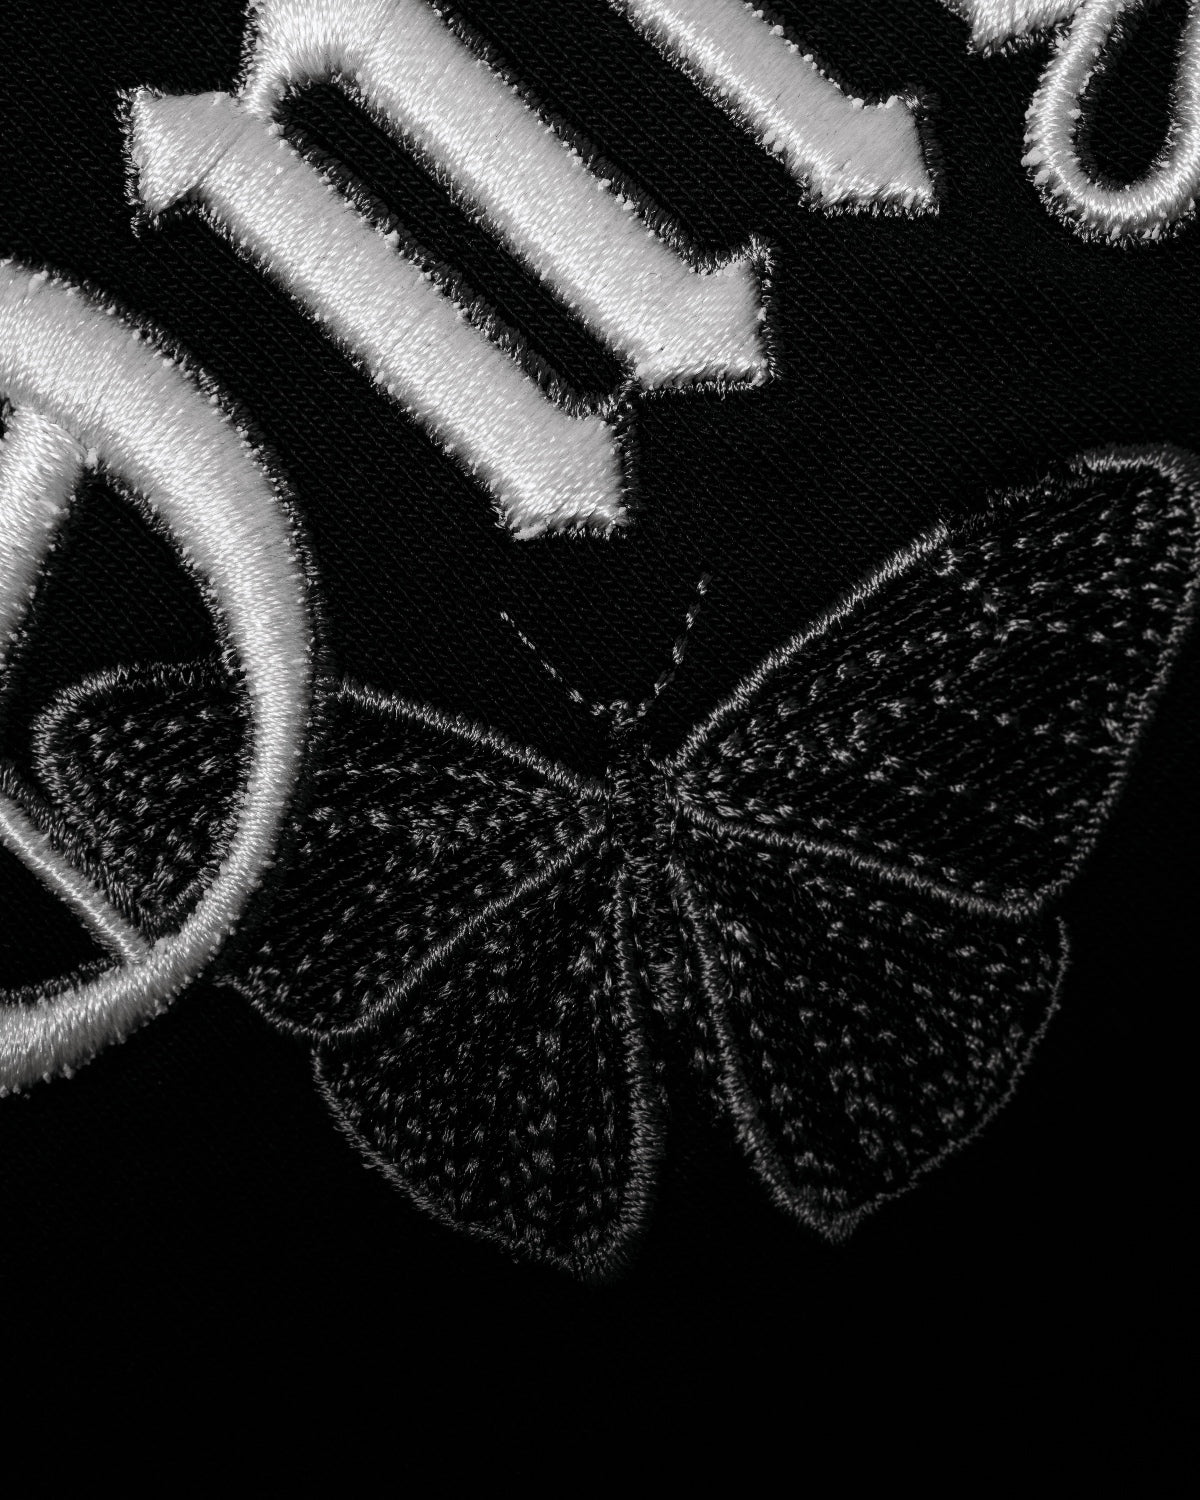 Black Embroidered Butterfly T-Shirt